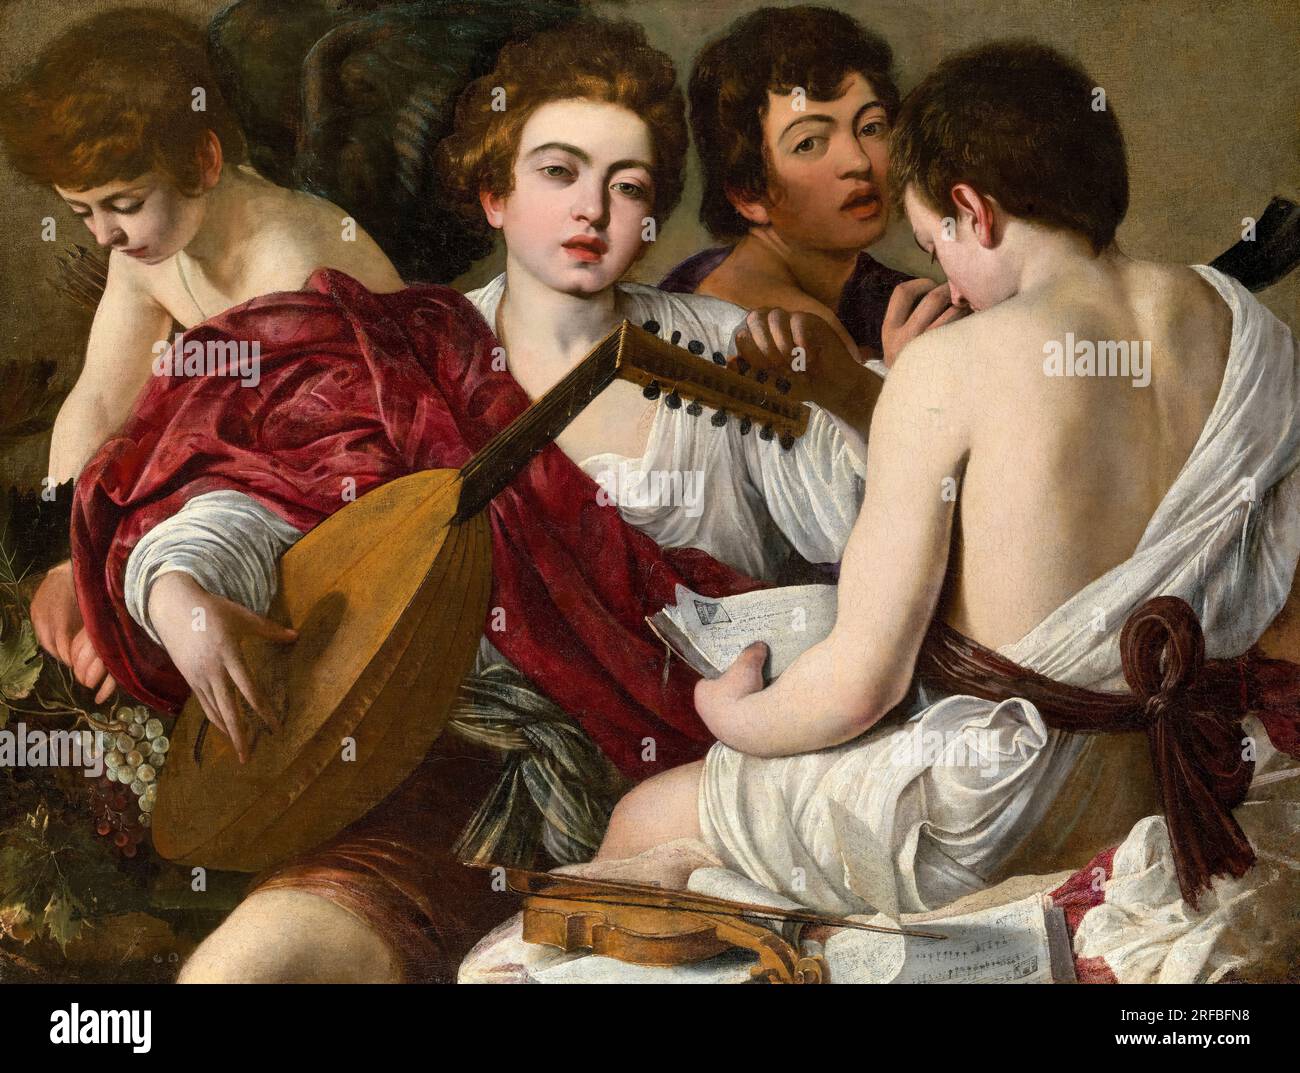 The Musicians, painting in oil on canvas by Michelangelo Merisi da Caravaggio, 1597 Stock Photo